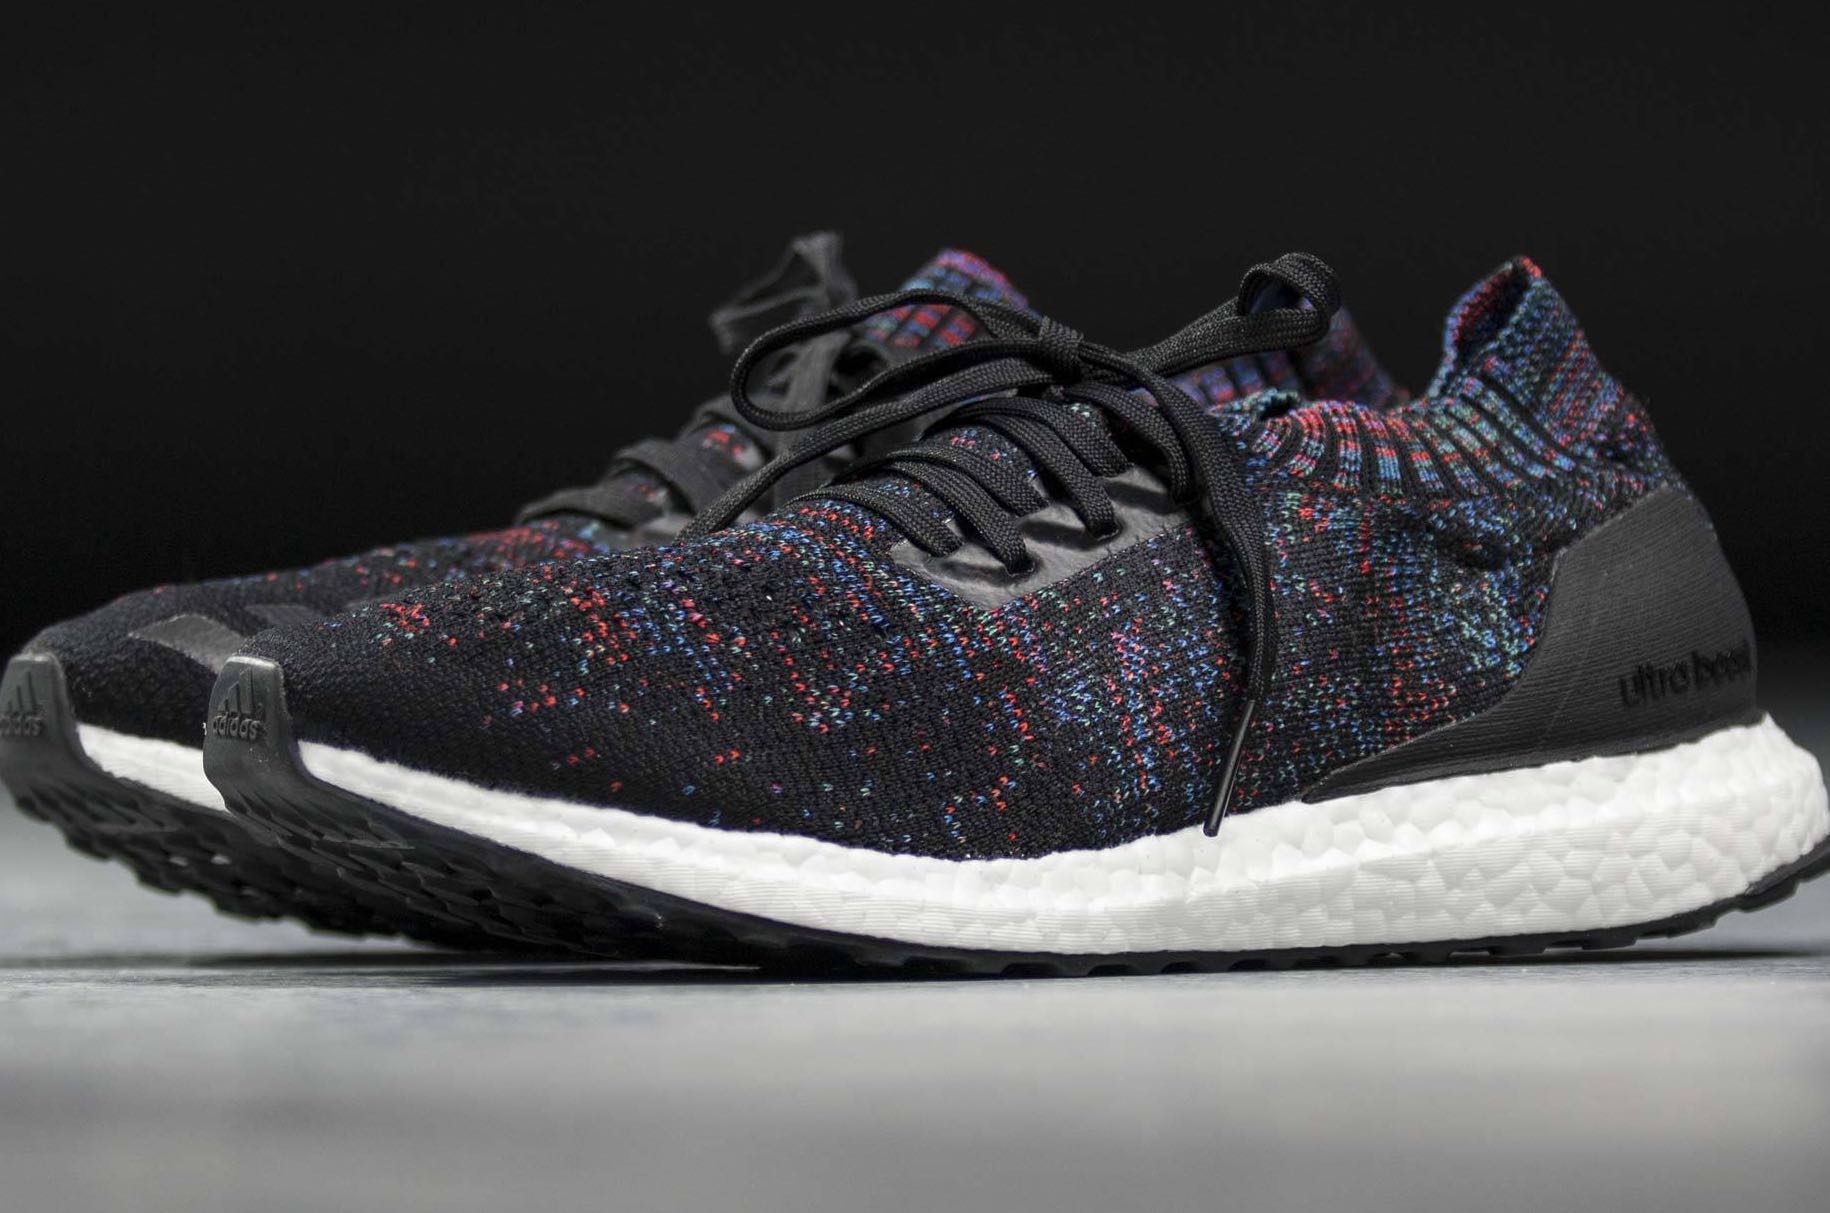 ultra boost uncaged core black